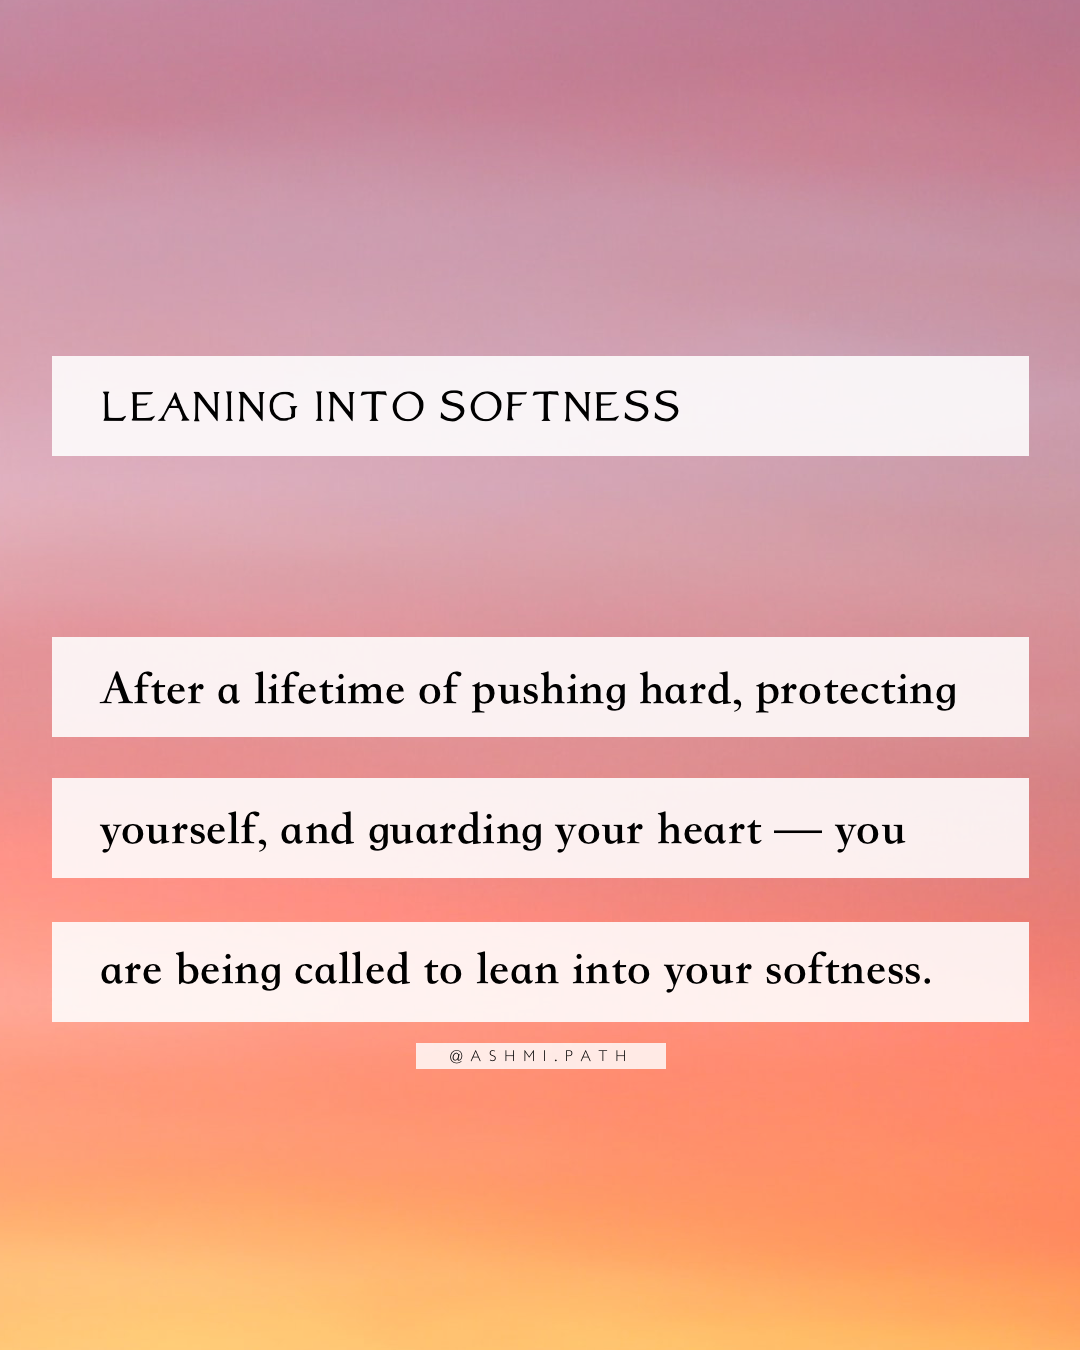 Leaning into Softness